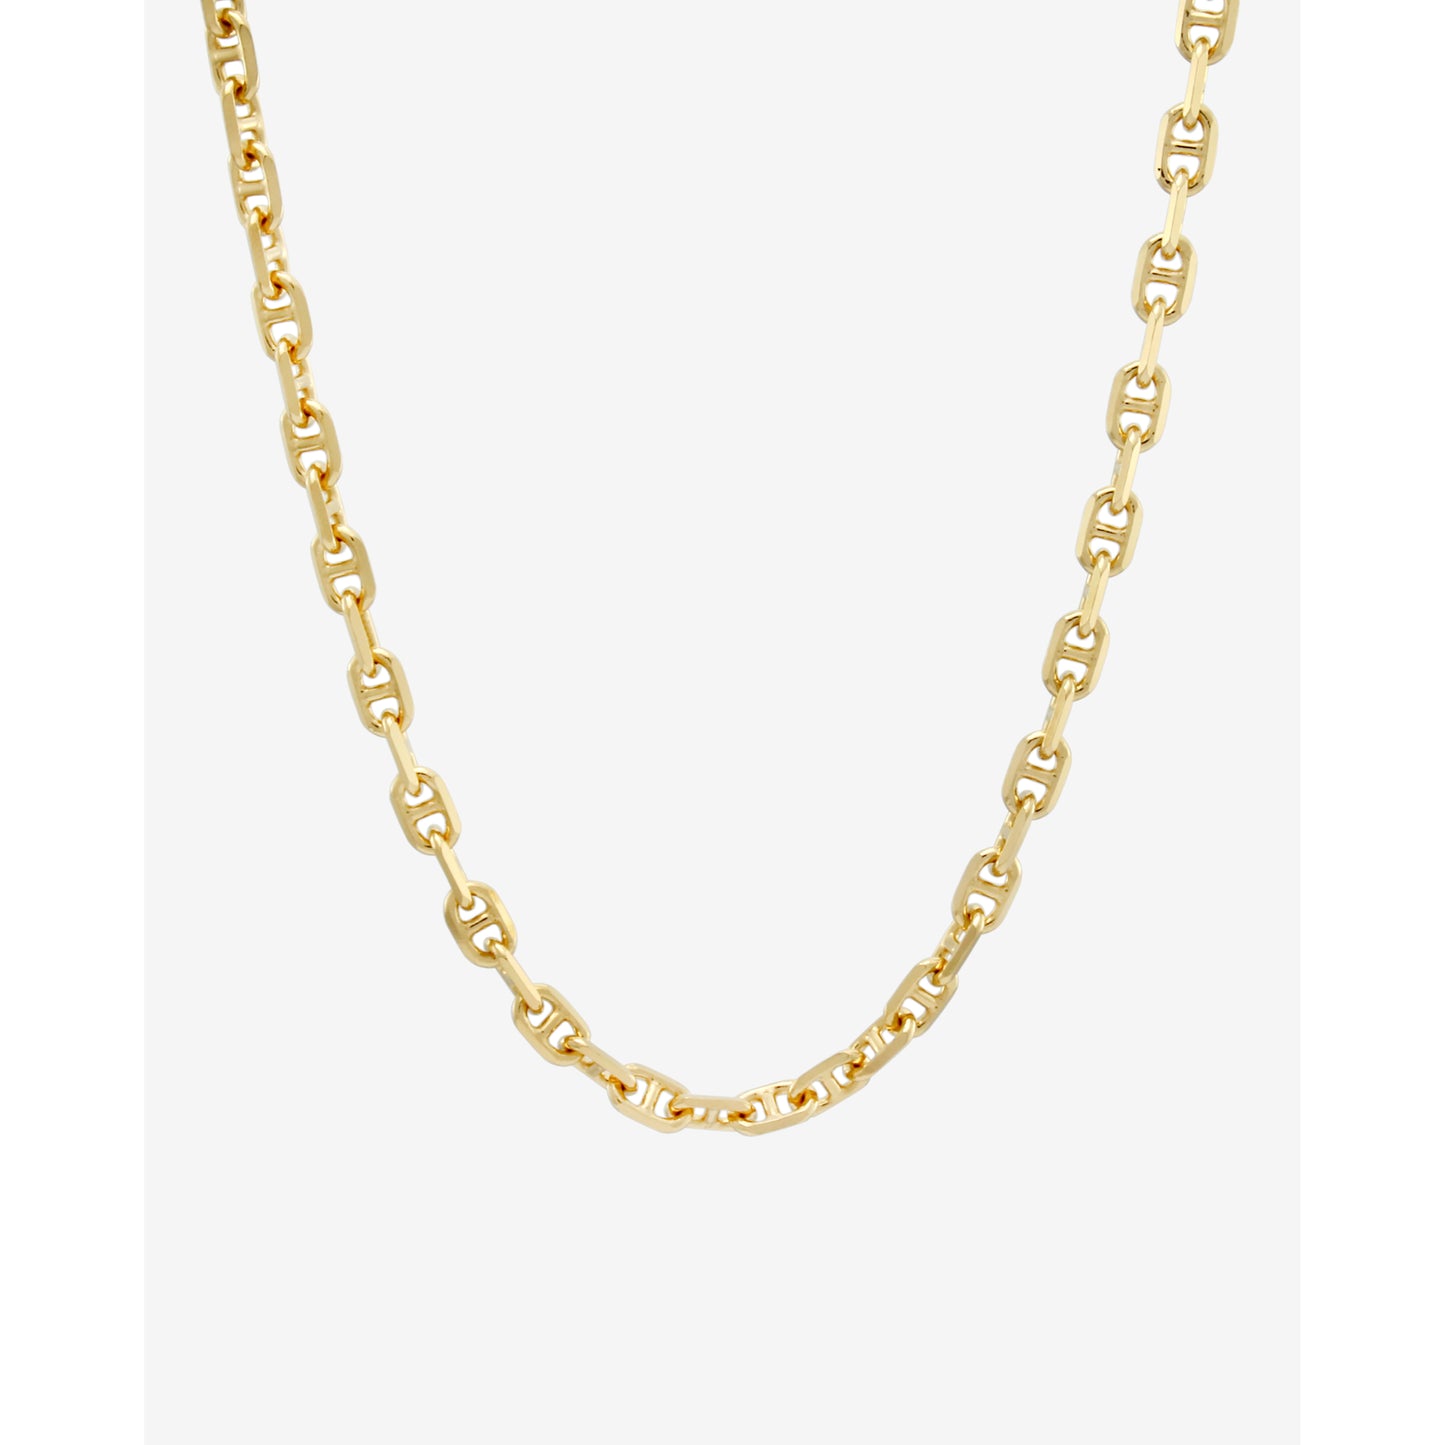 40cm Chunky Anchor Chain Necklace in Gold